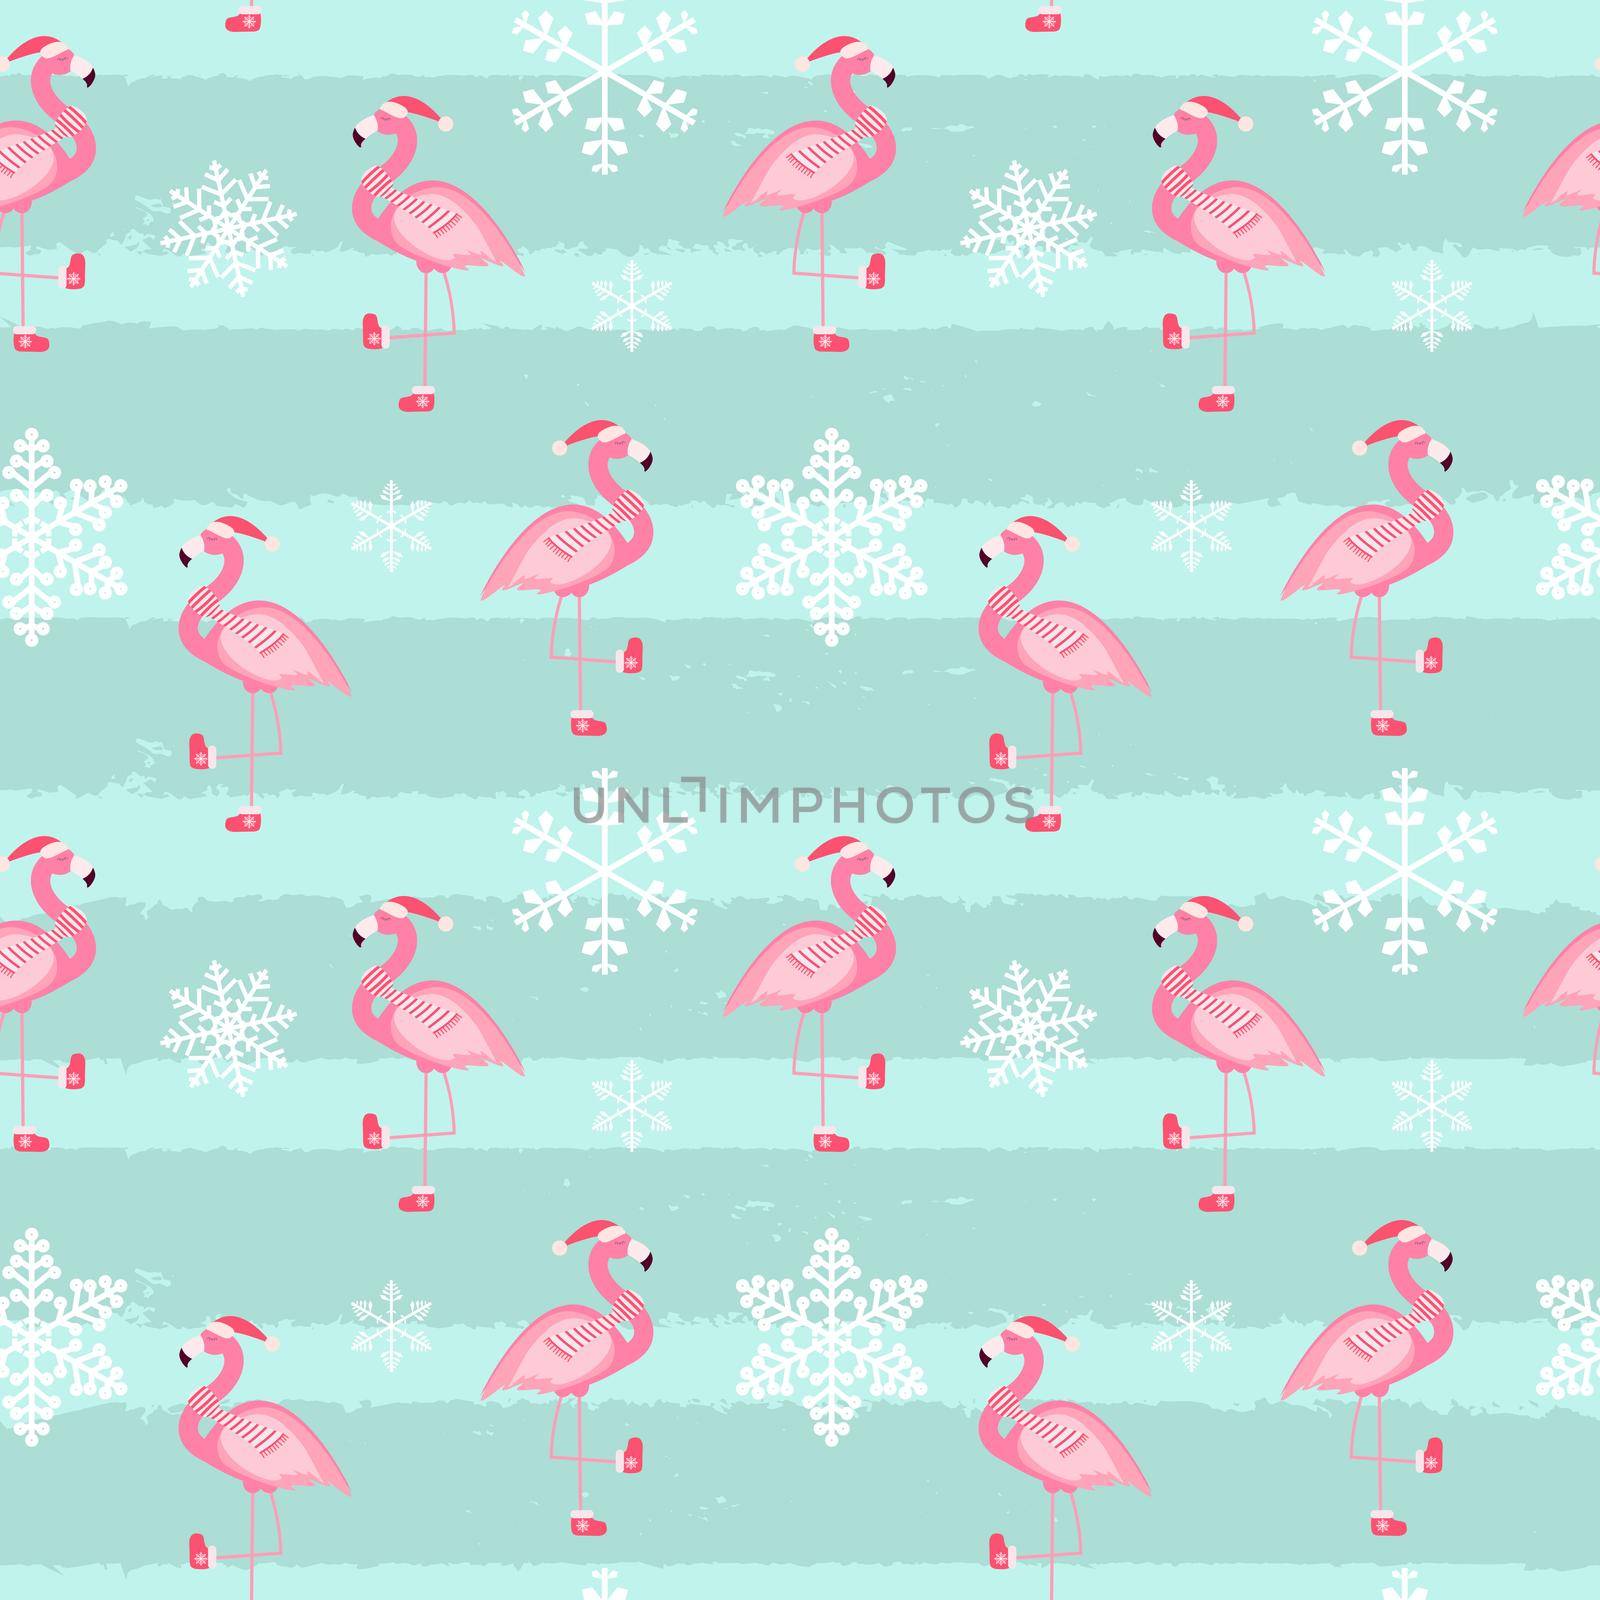 Cute Pink Flamingo New Year and Christmas Seamless Pattern Background Vector Illustration EPS10